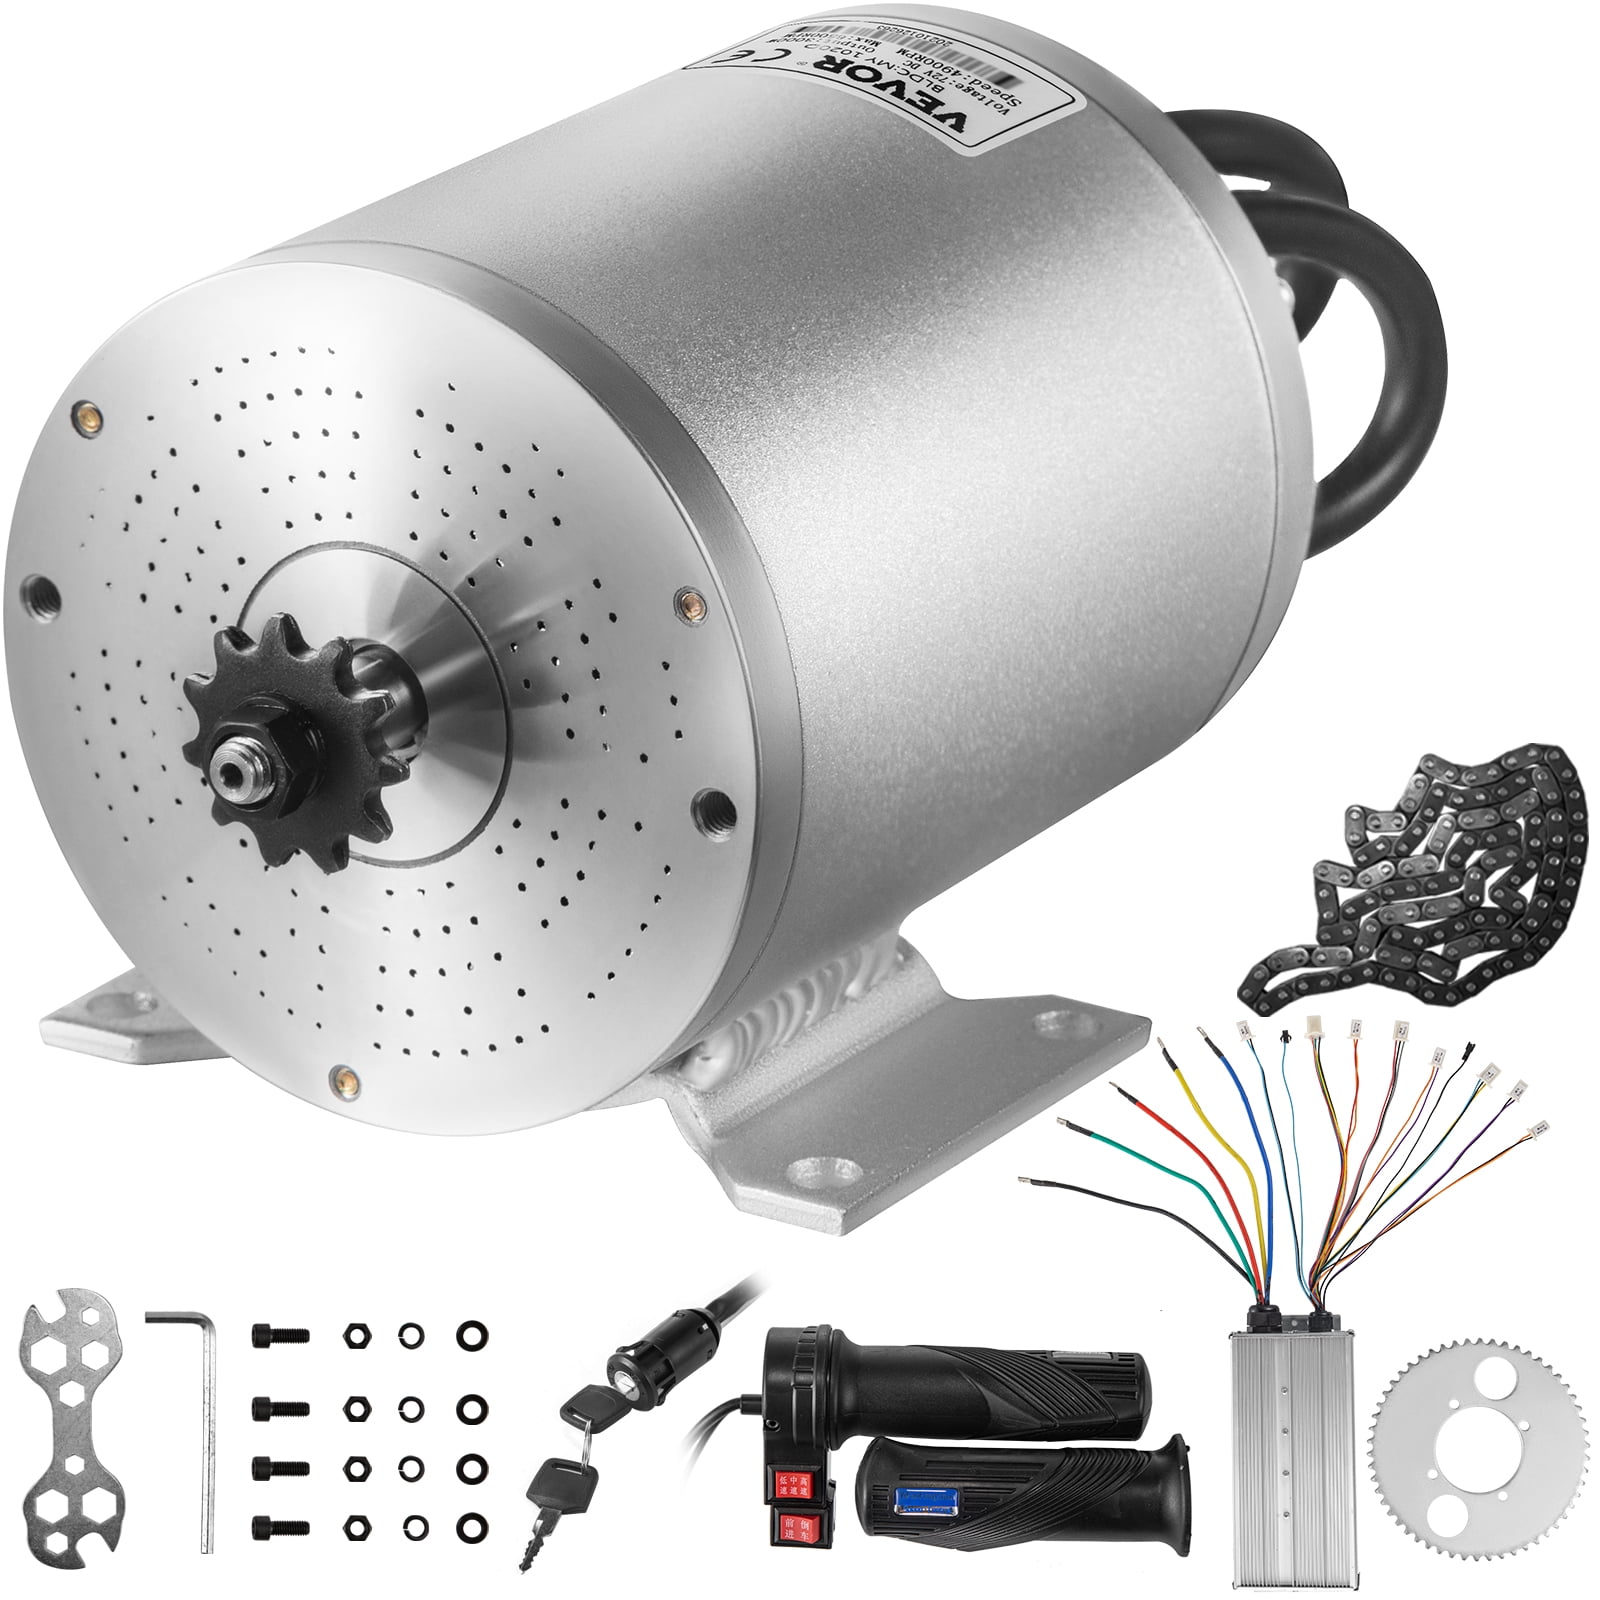 Electric Motor 12 Volt Powerful Motor From Child's Vehicle Strong DC Motor Used 